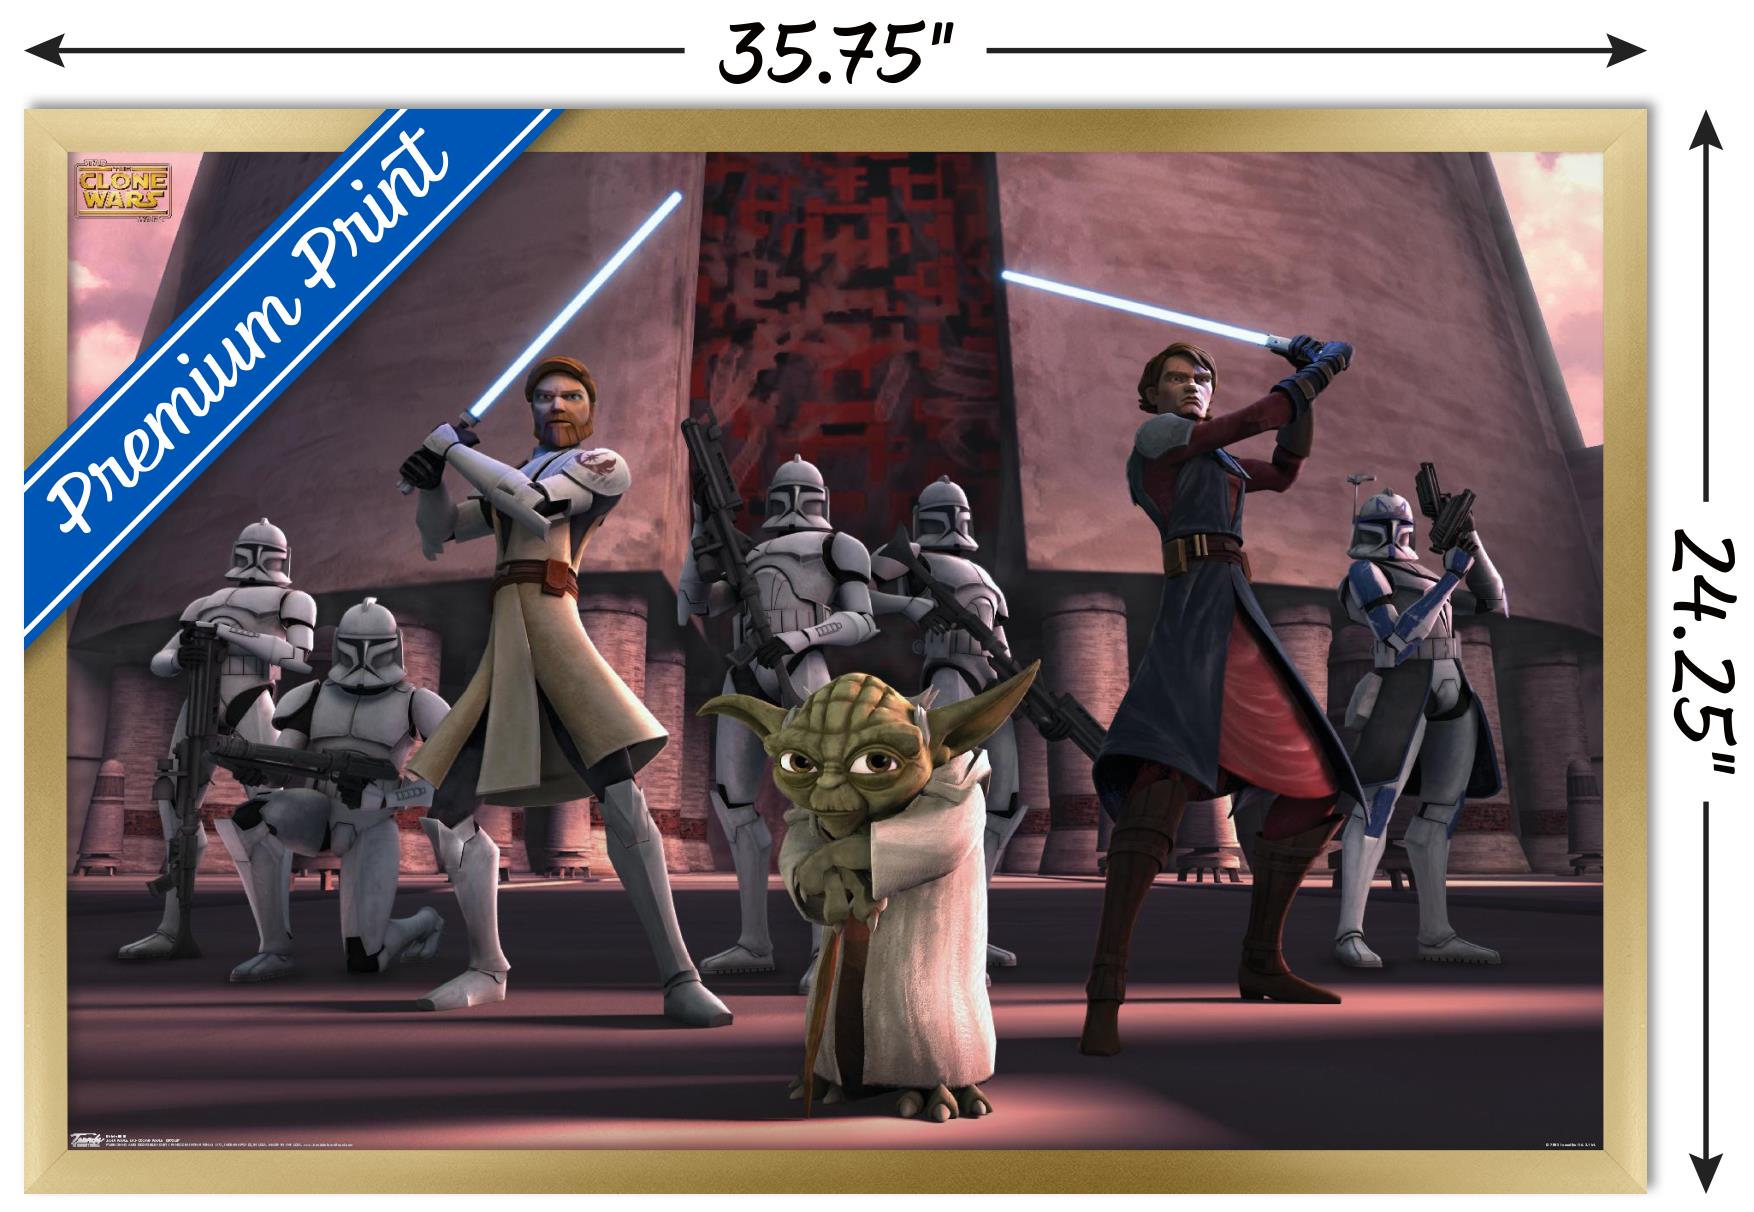 Star Wars: The Clone Wars - Group Wall Poster, 22.375" x 34", Framed - image 3 of 5